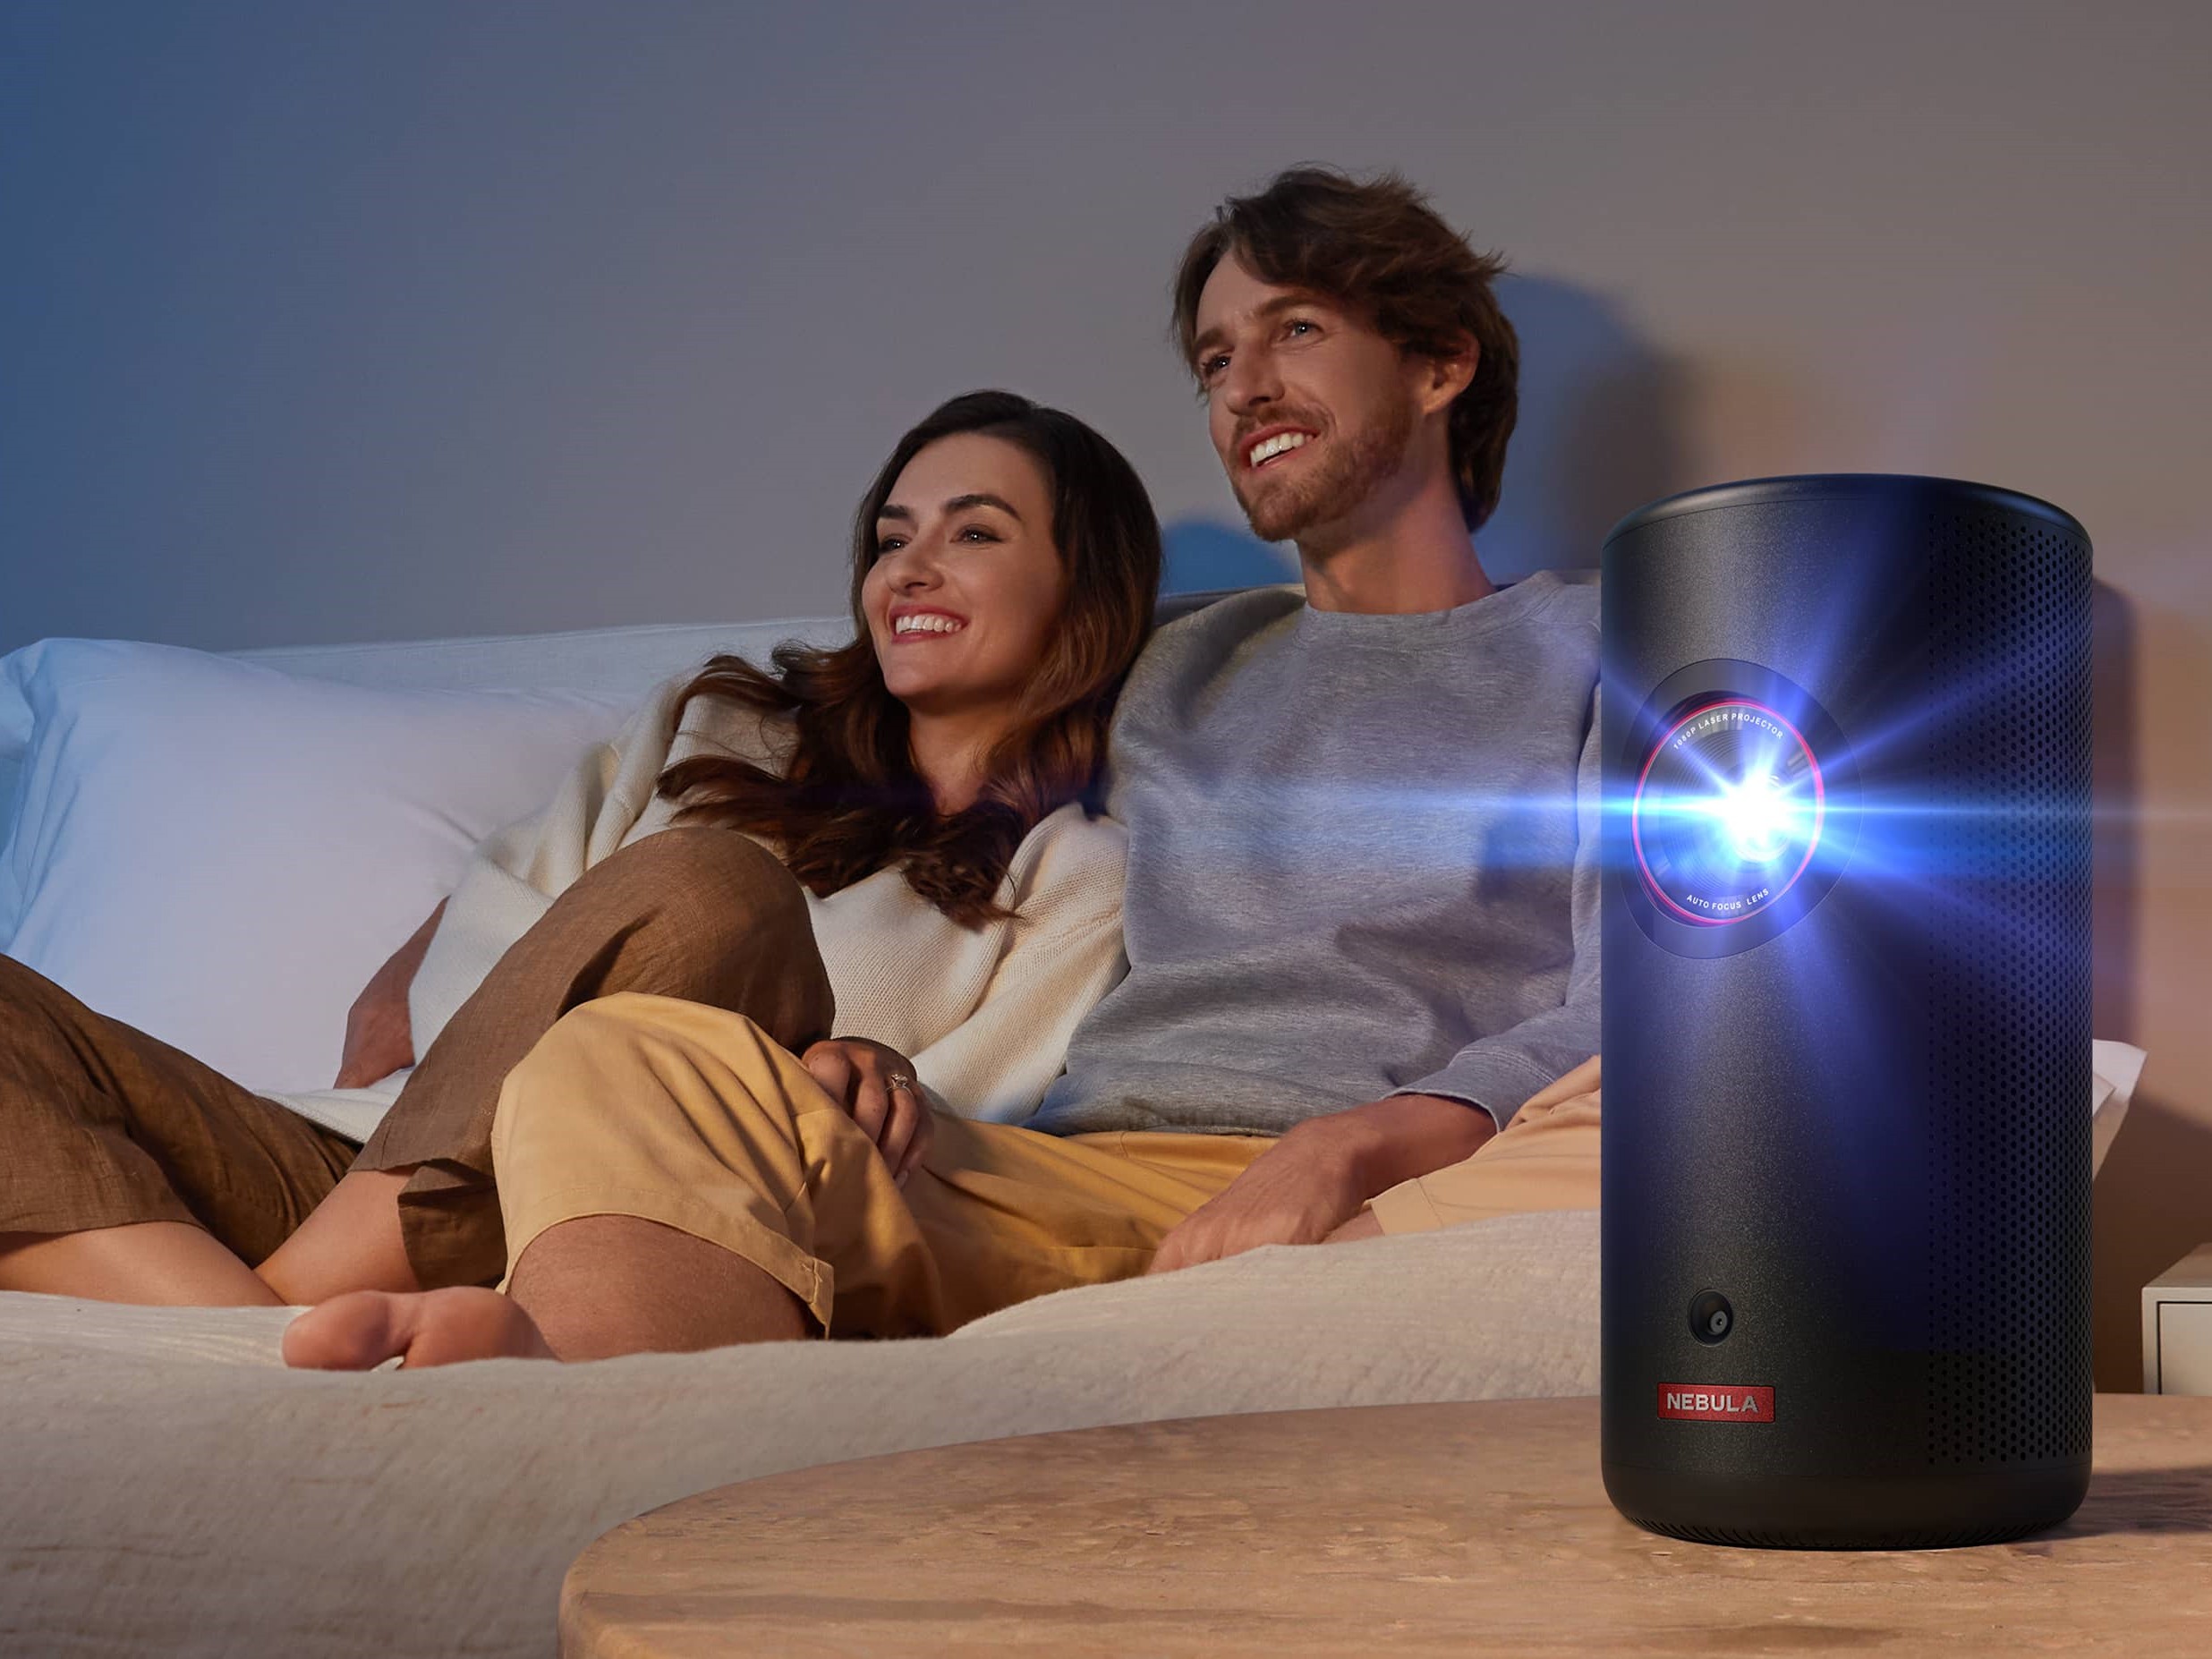 Anker Nebula Capsule 3 Laser Projector pre-order campaign launches with  US$120 discount -  News